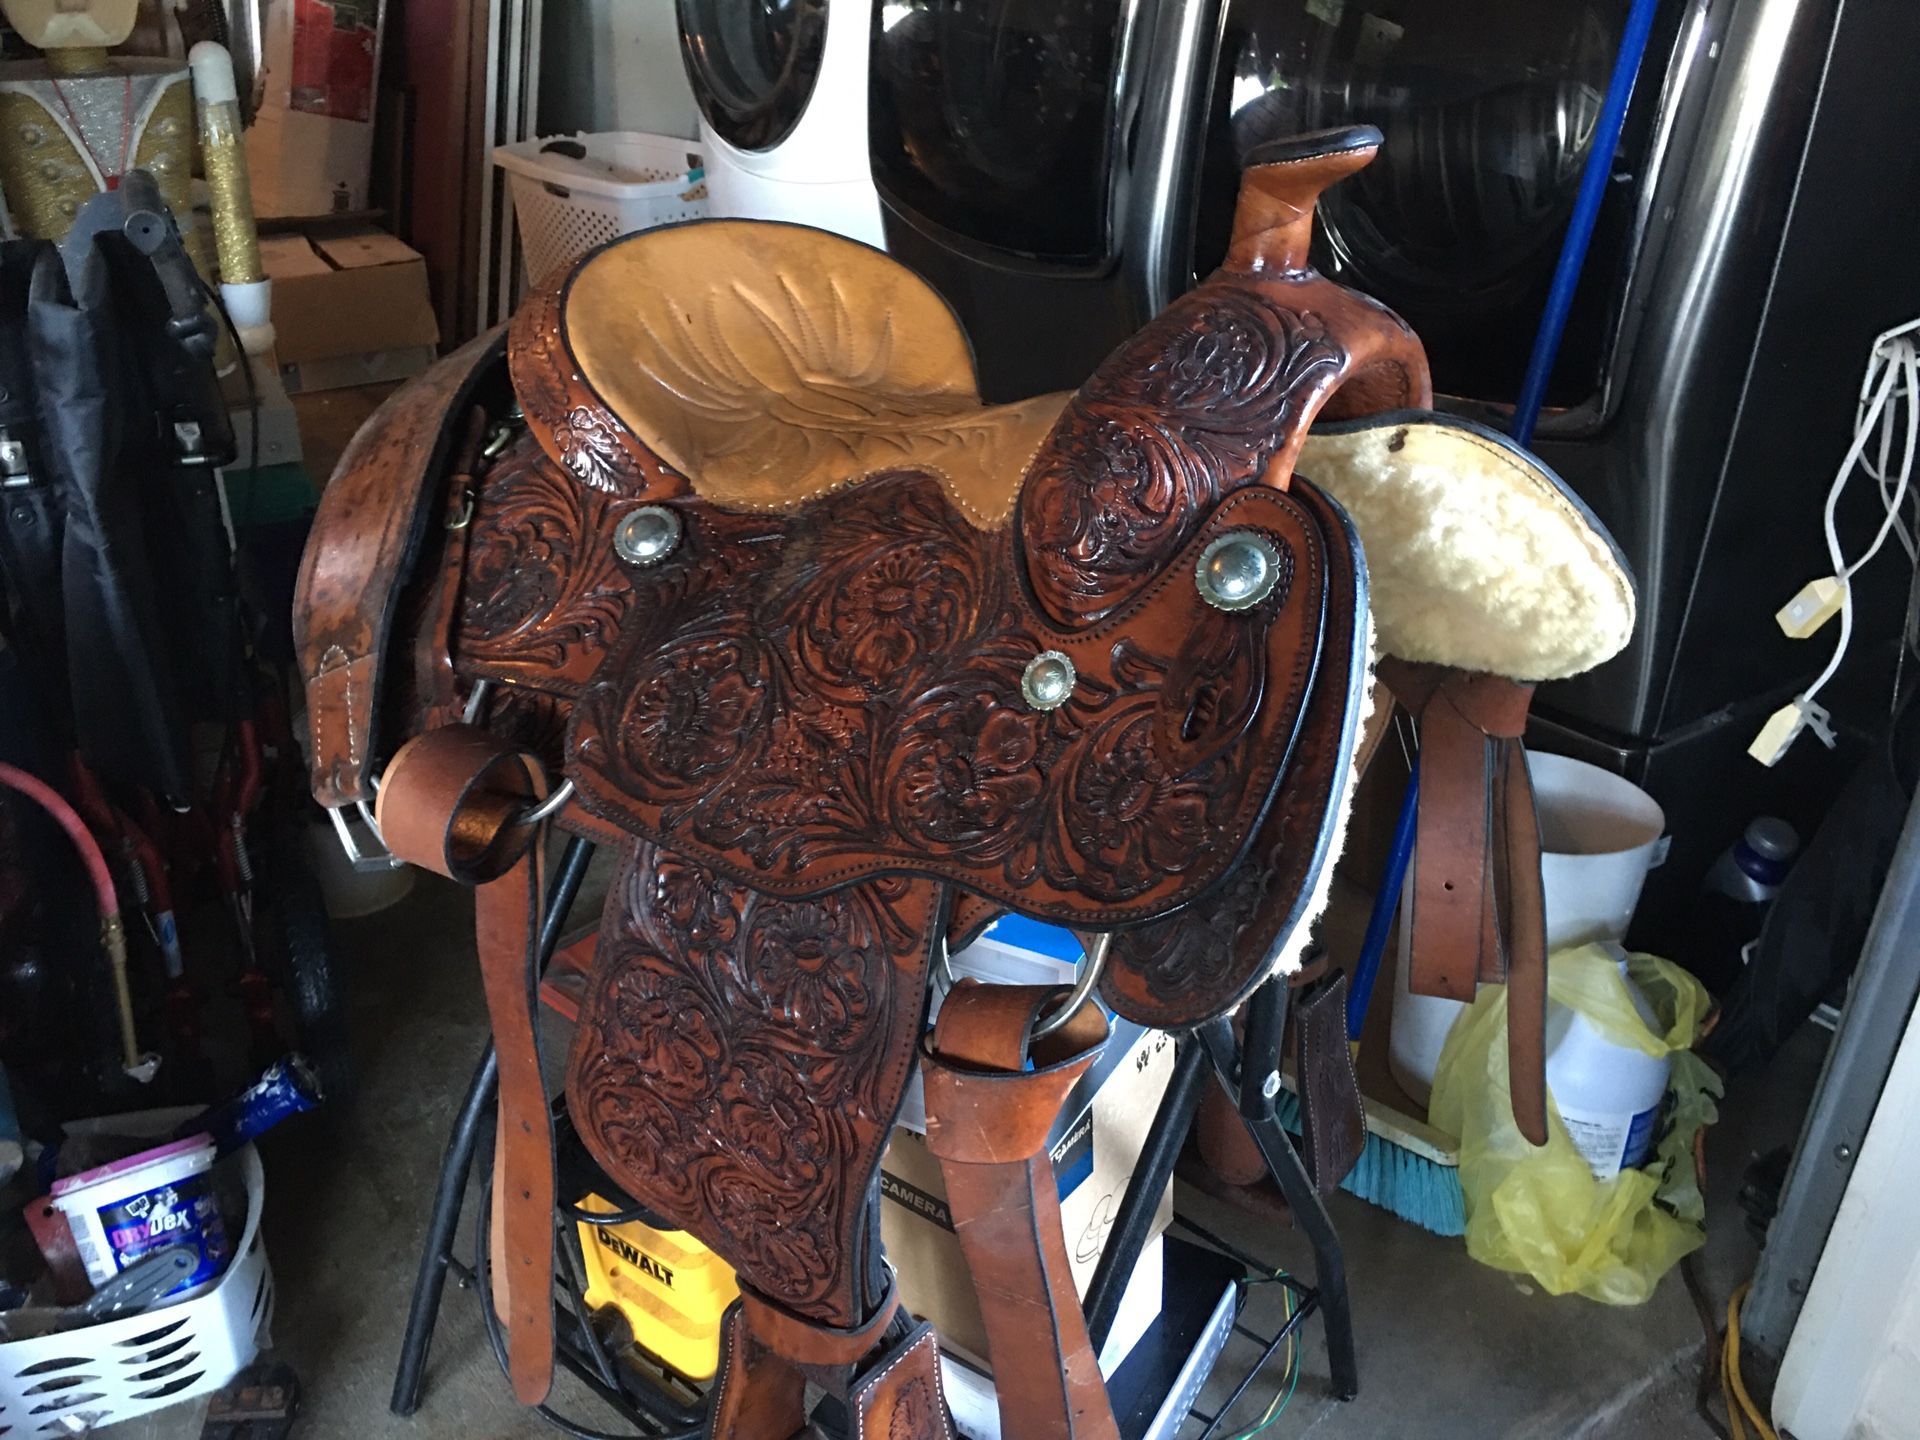 Western saddle never used in good condition it’s been seating for two years